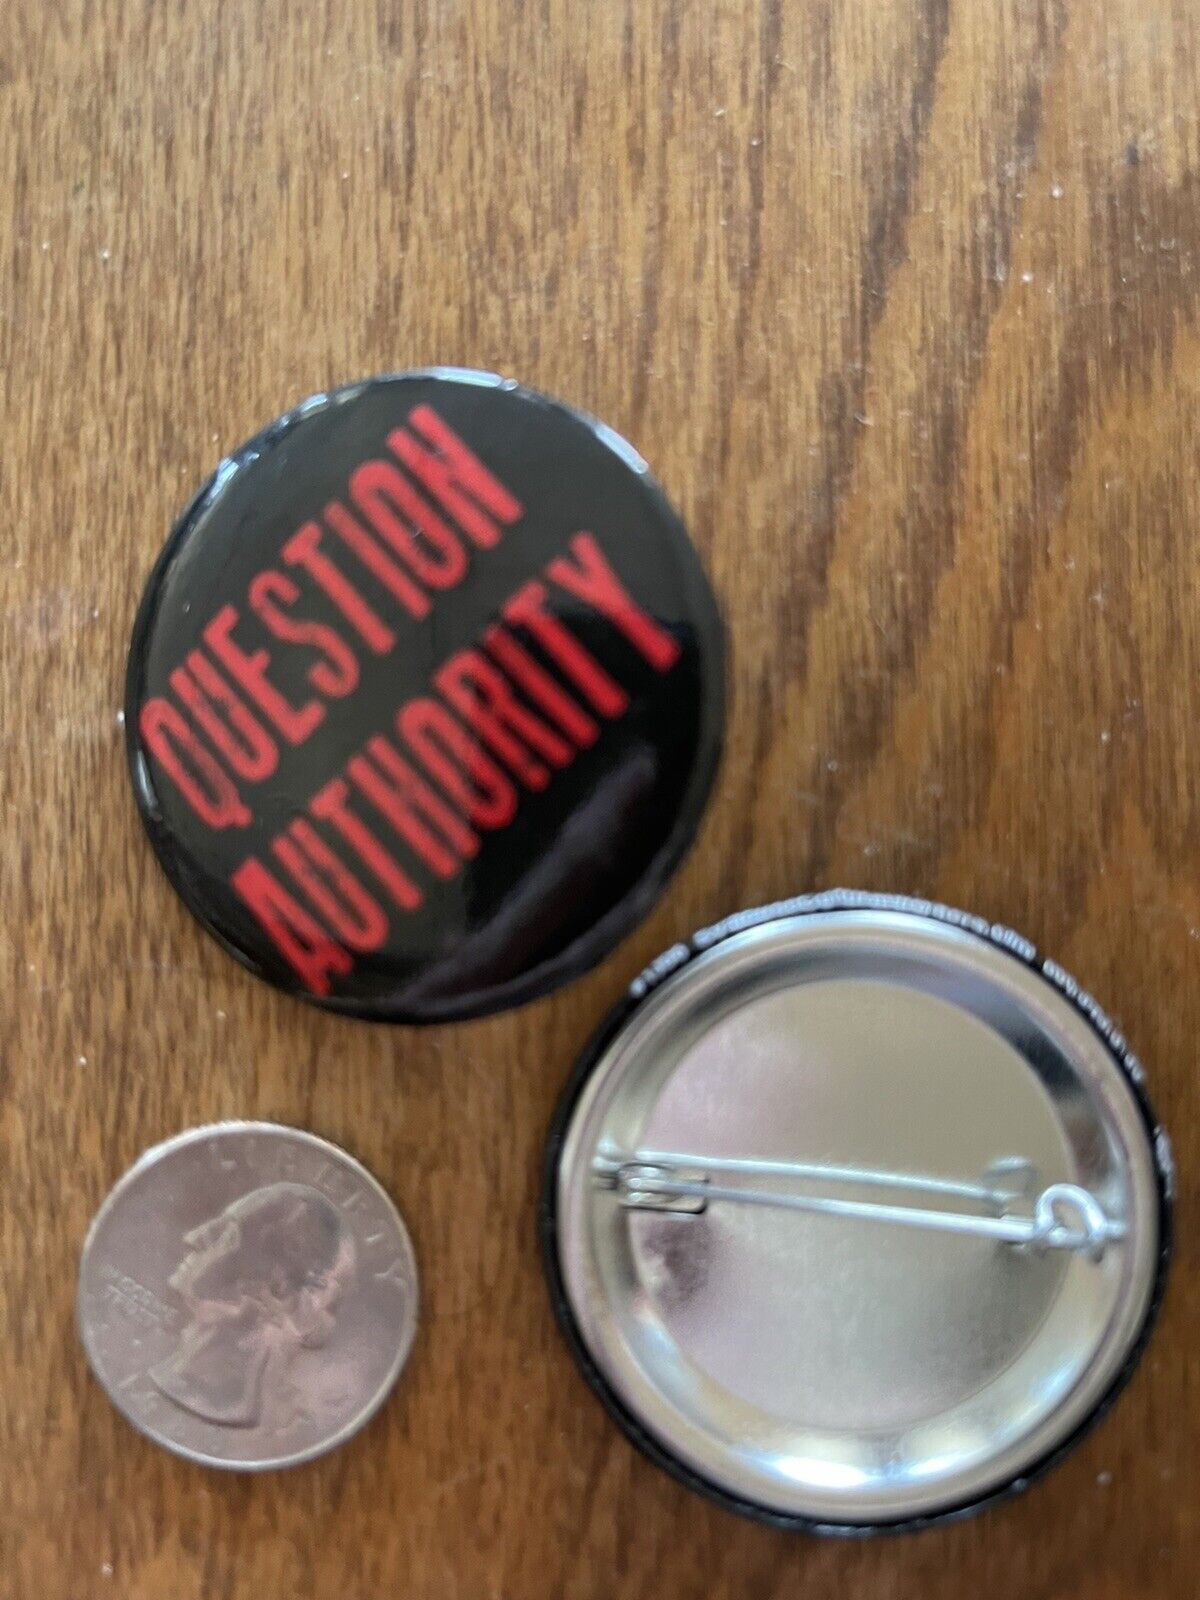 QUESTION AUTHORITY Button/pin Shipping included